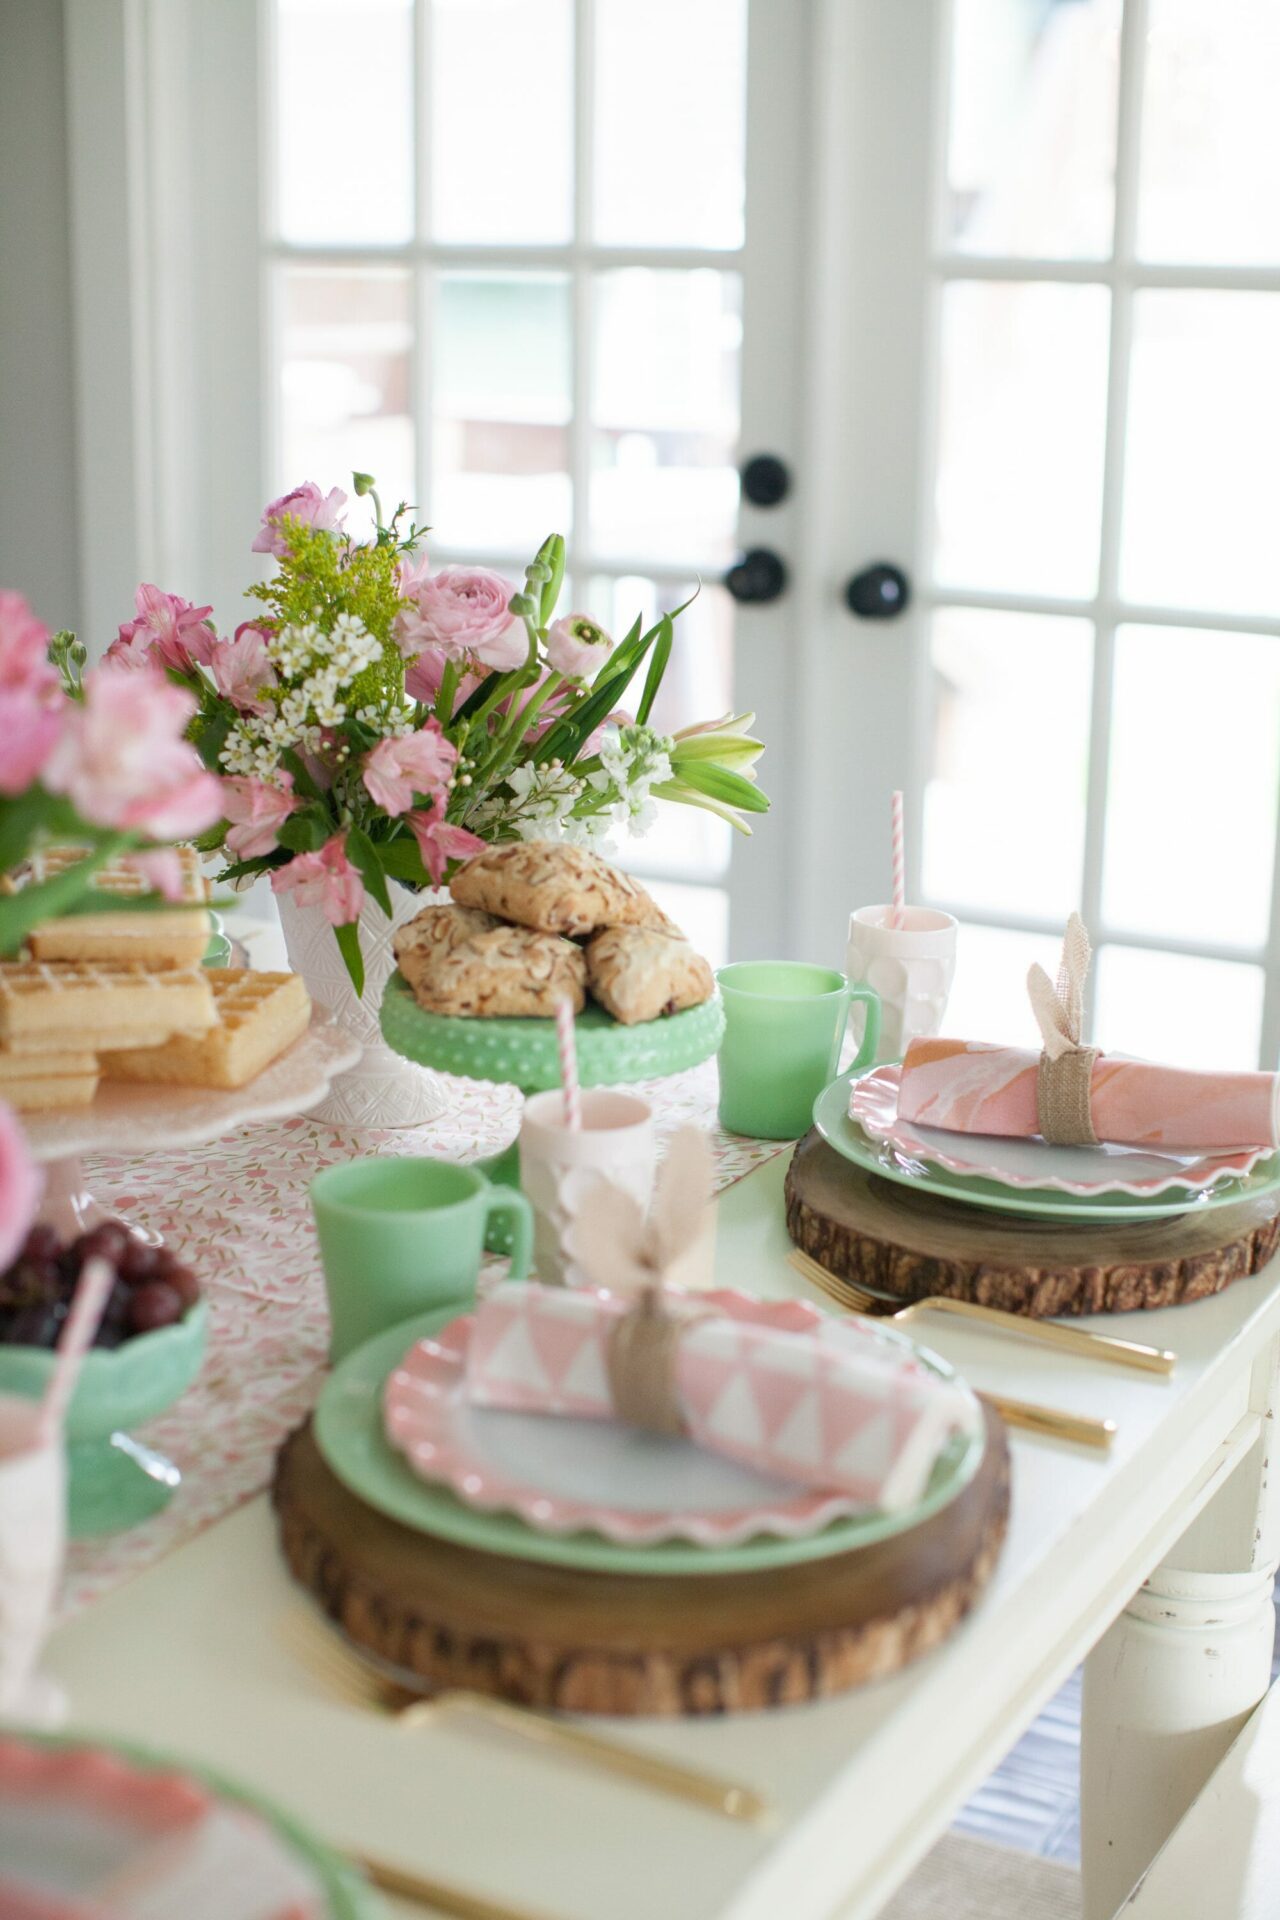 Host a Darling Brunch Party With These Nine Kitchen Accessories